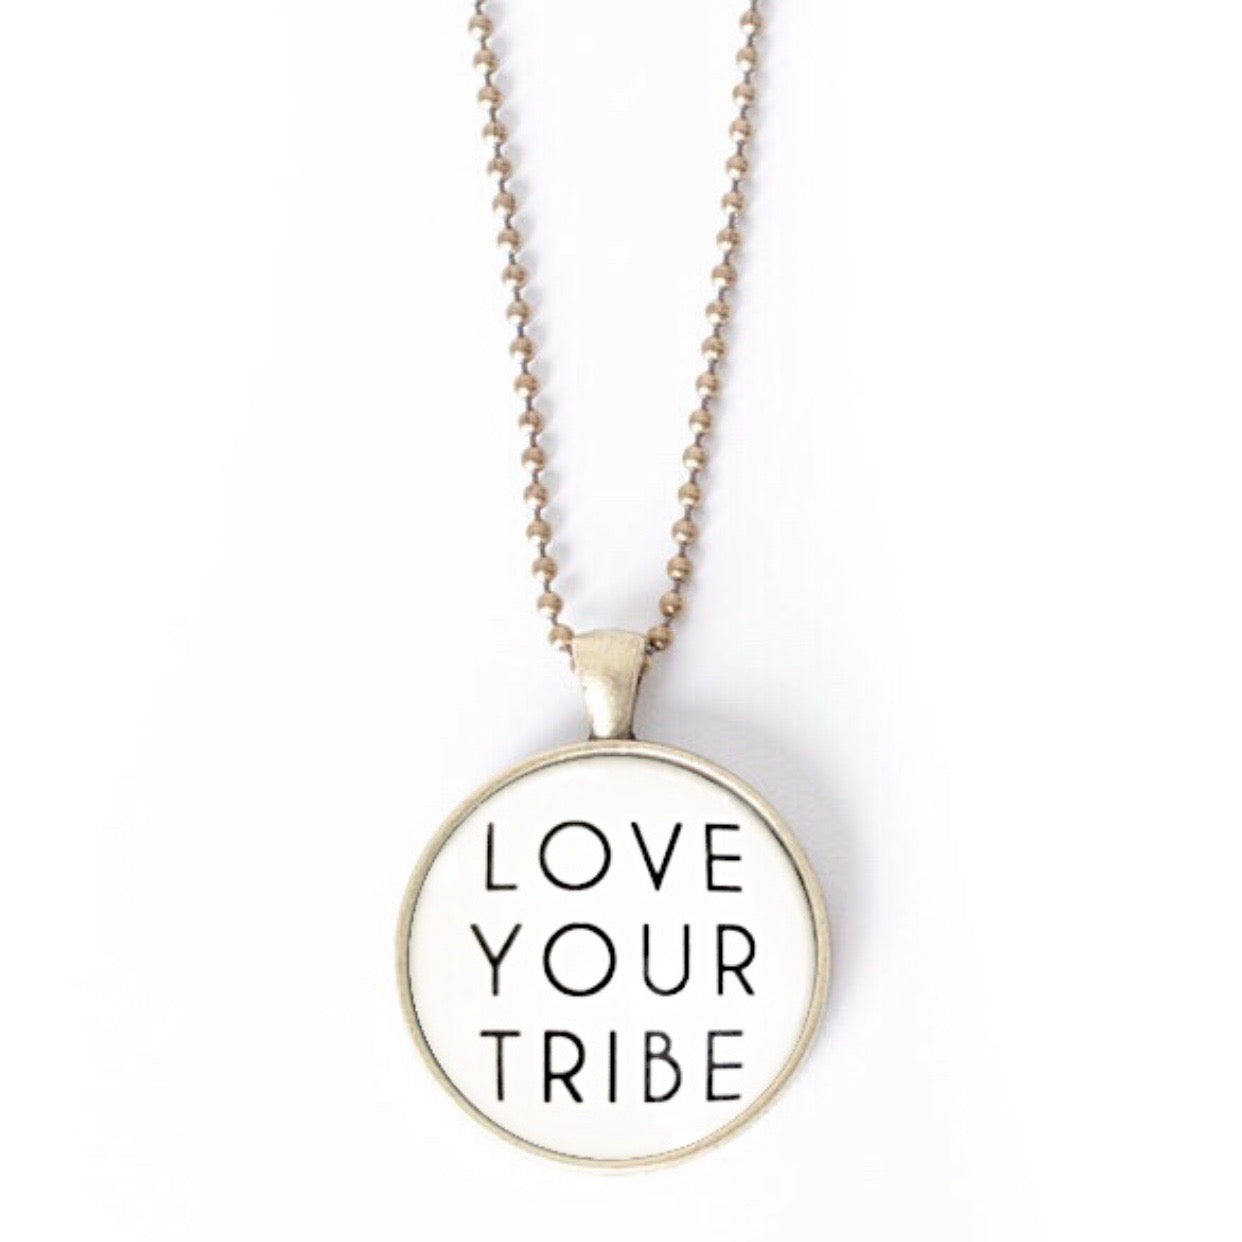 Love Your Tribe Necklace